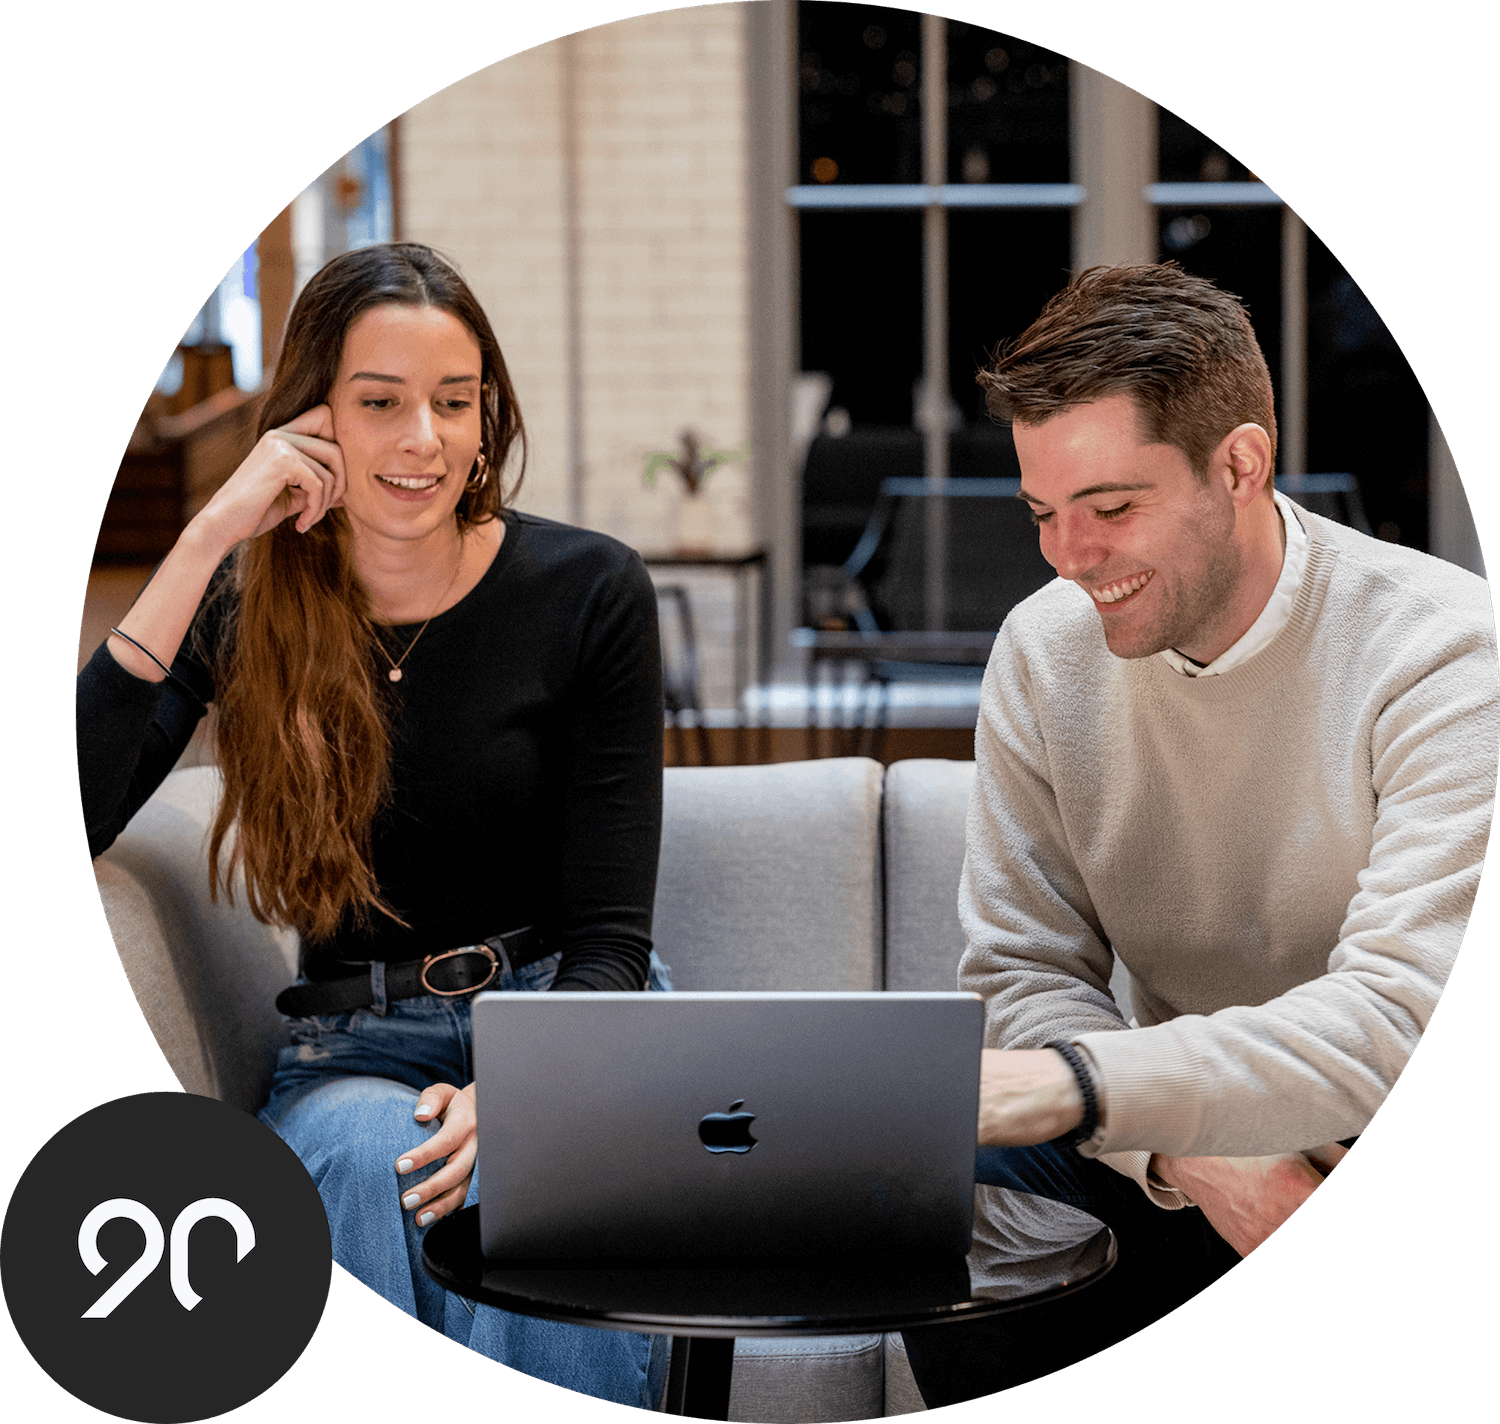 Two employees having a meeting using a shared laptop. Superimposed is the Ninety logo.